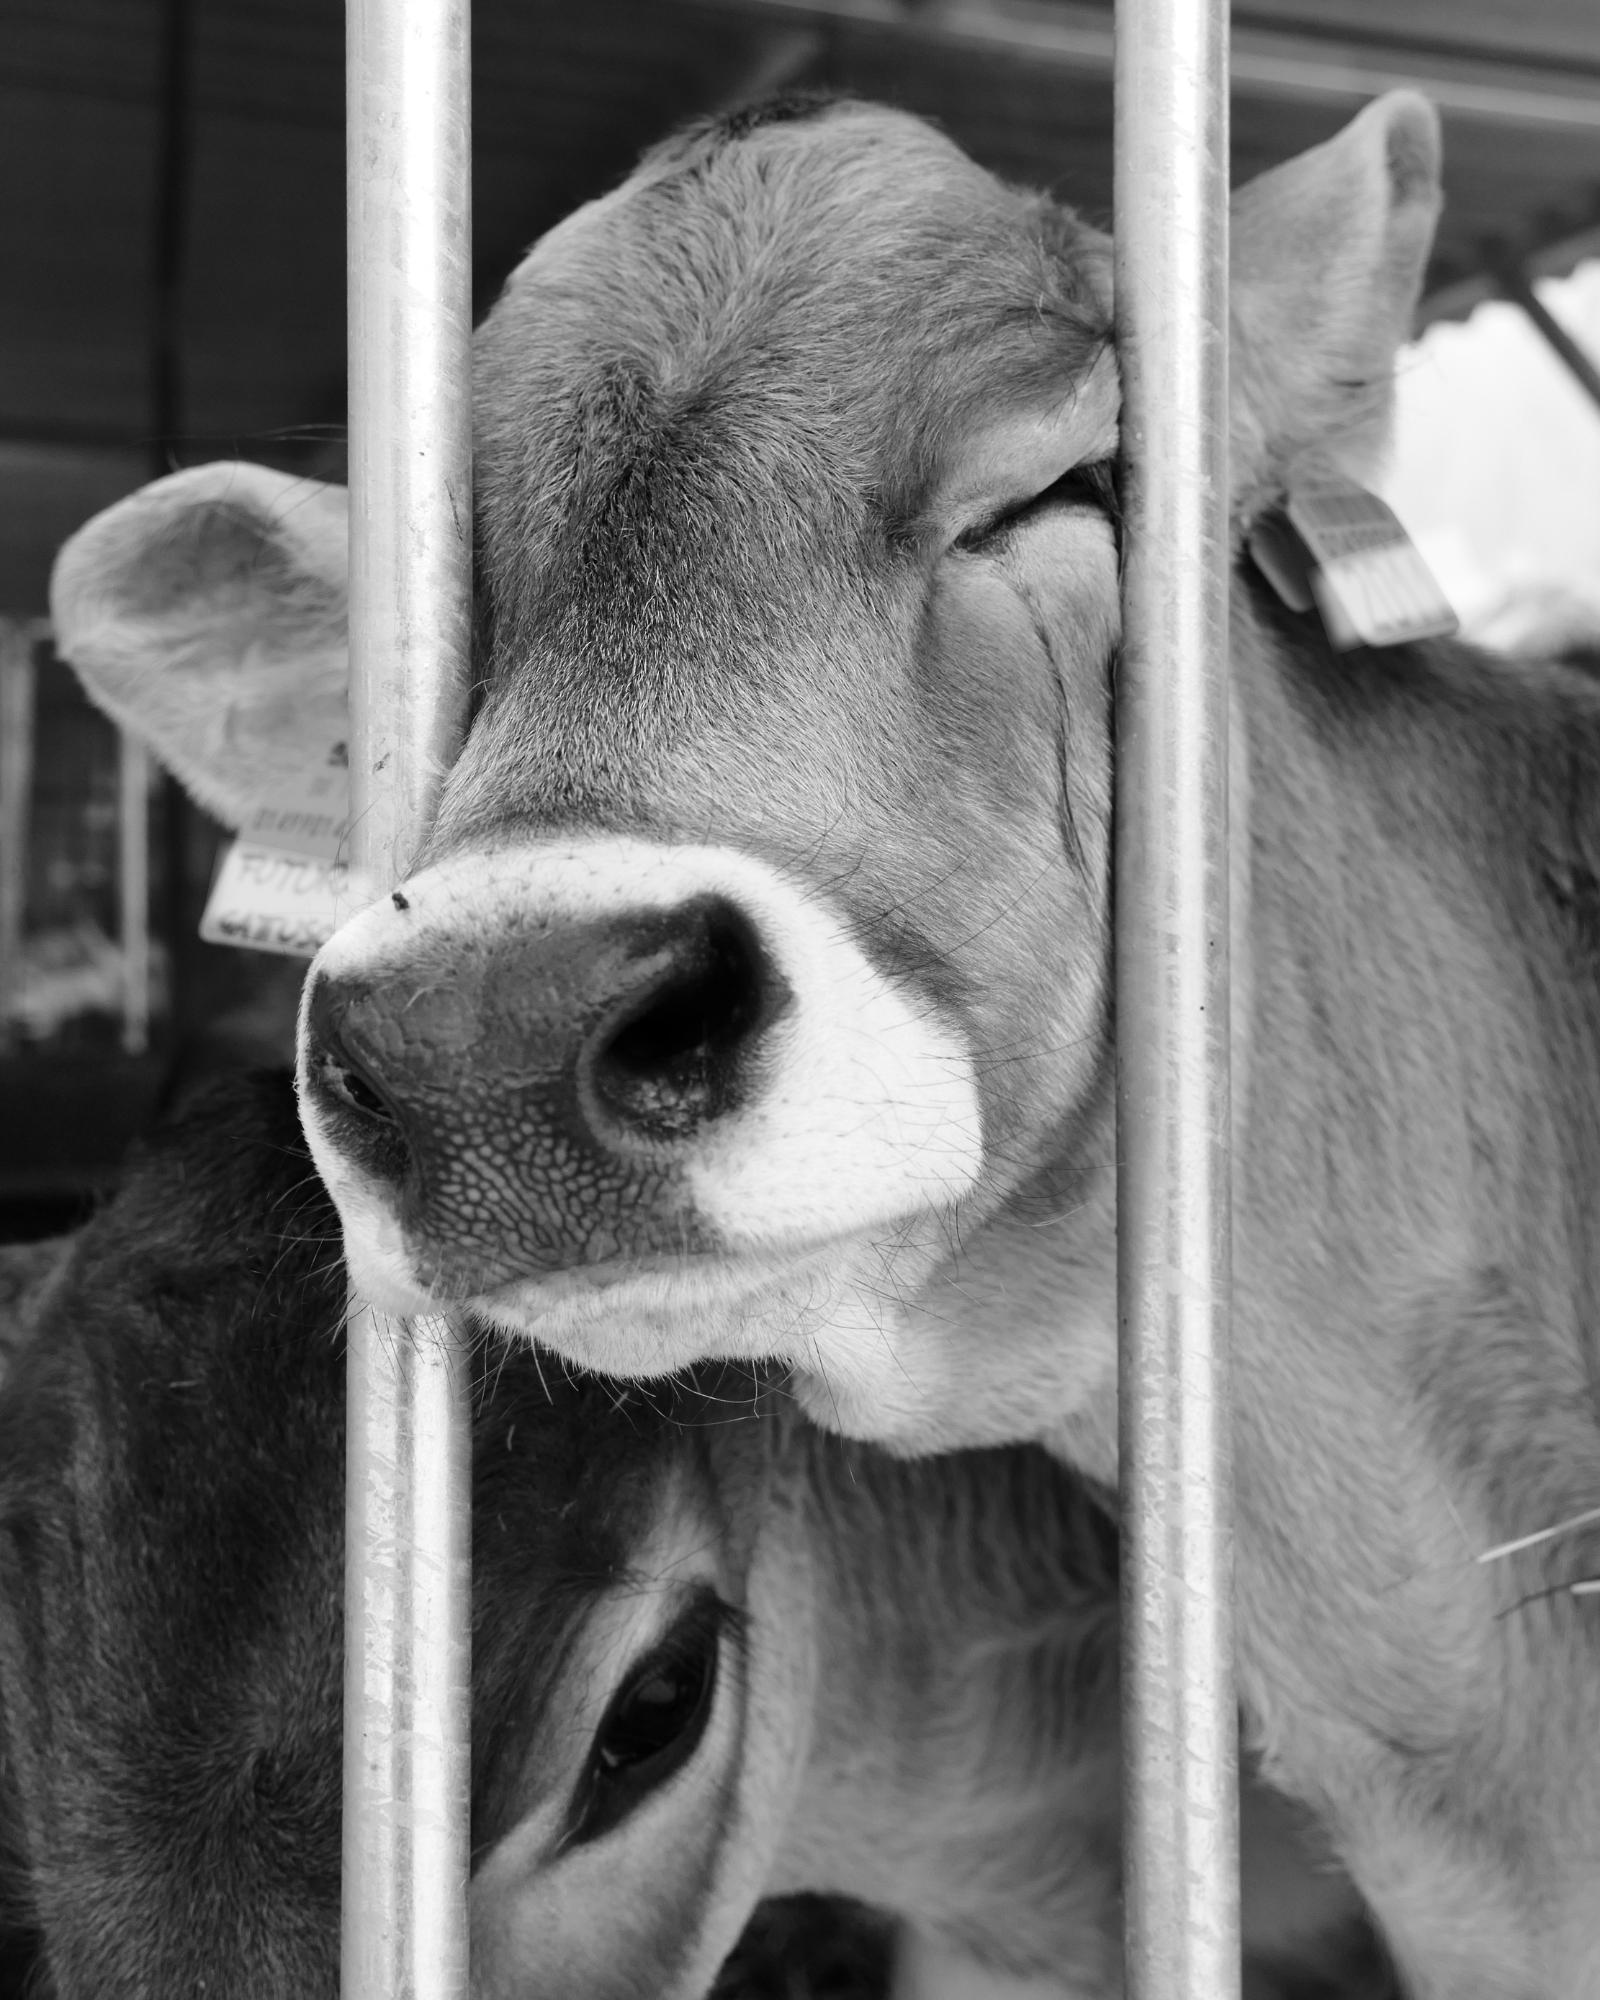 Cow with face between bars crying